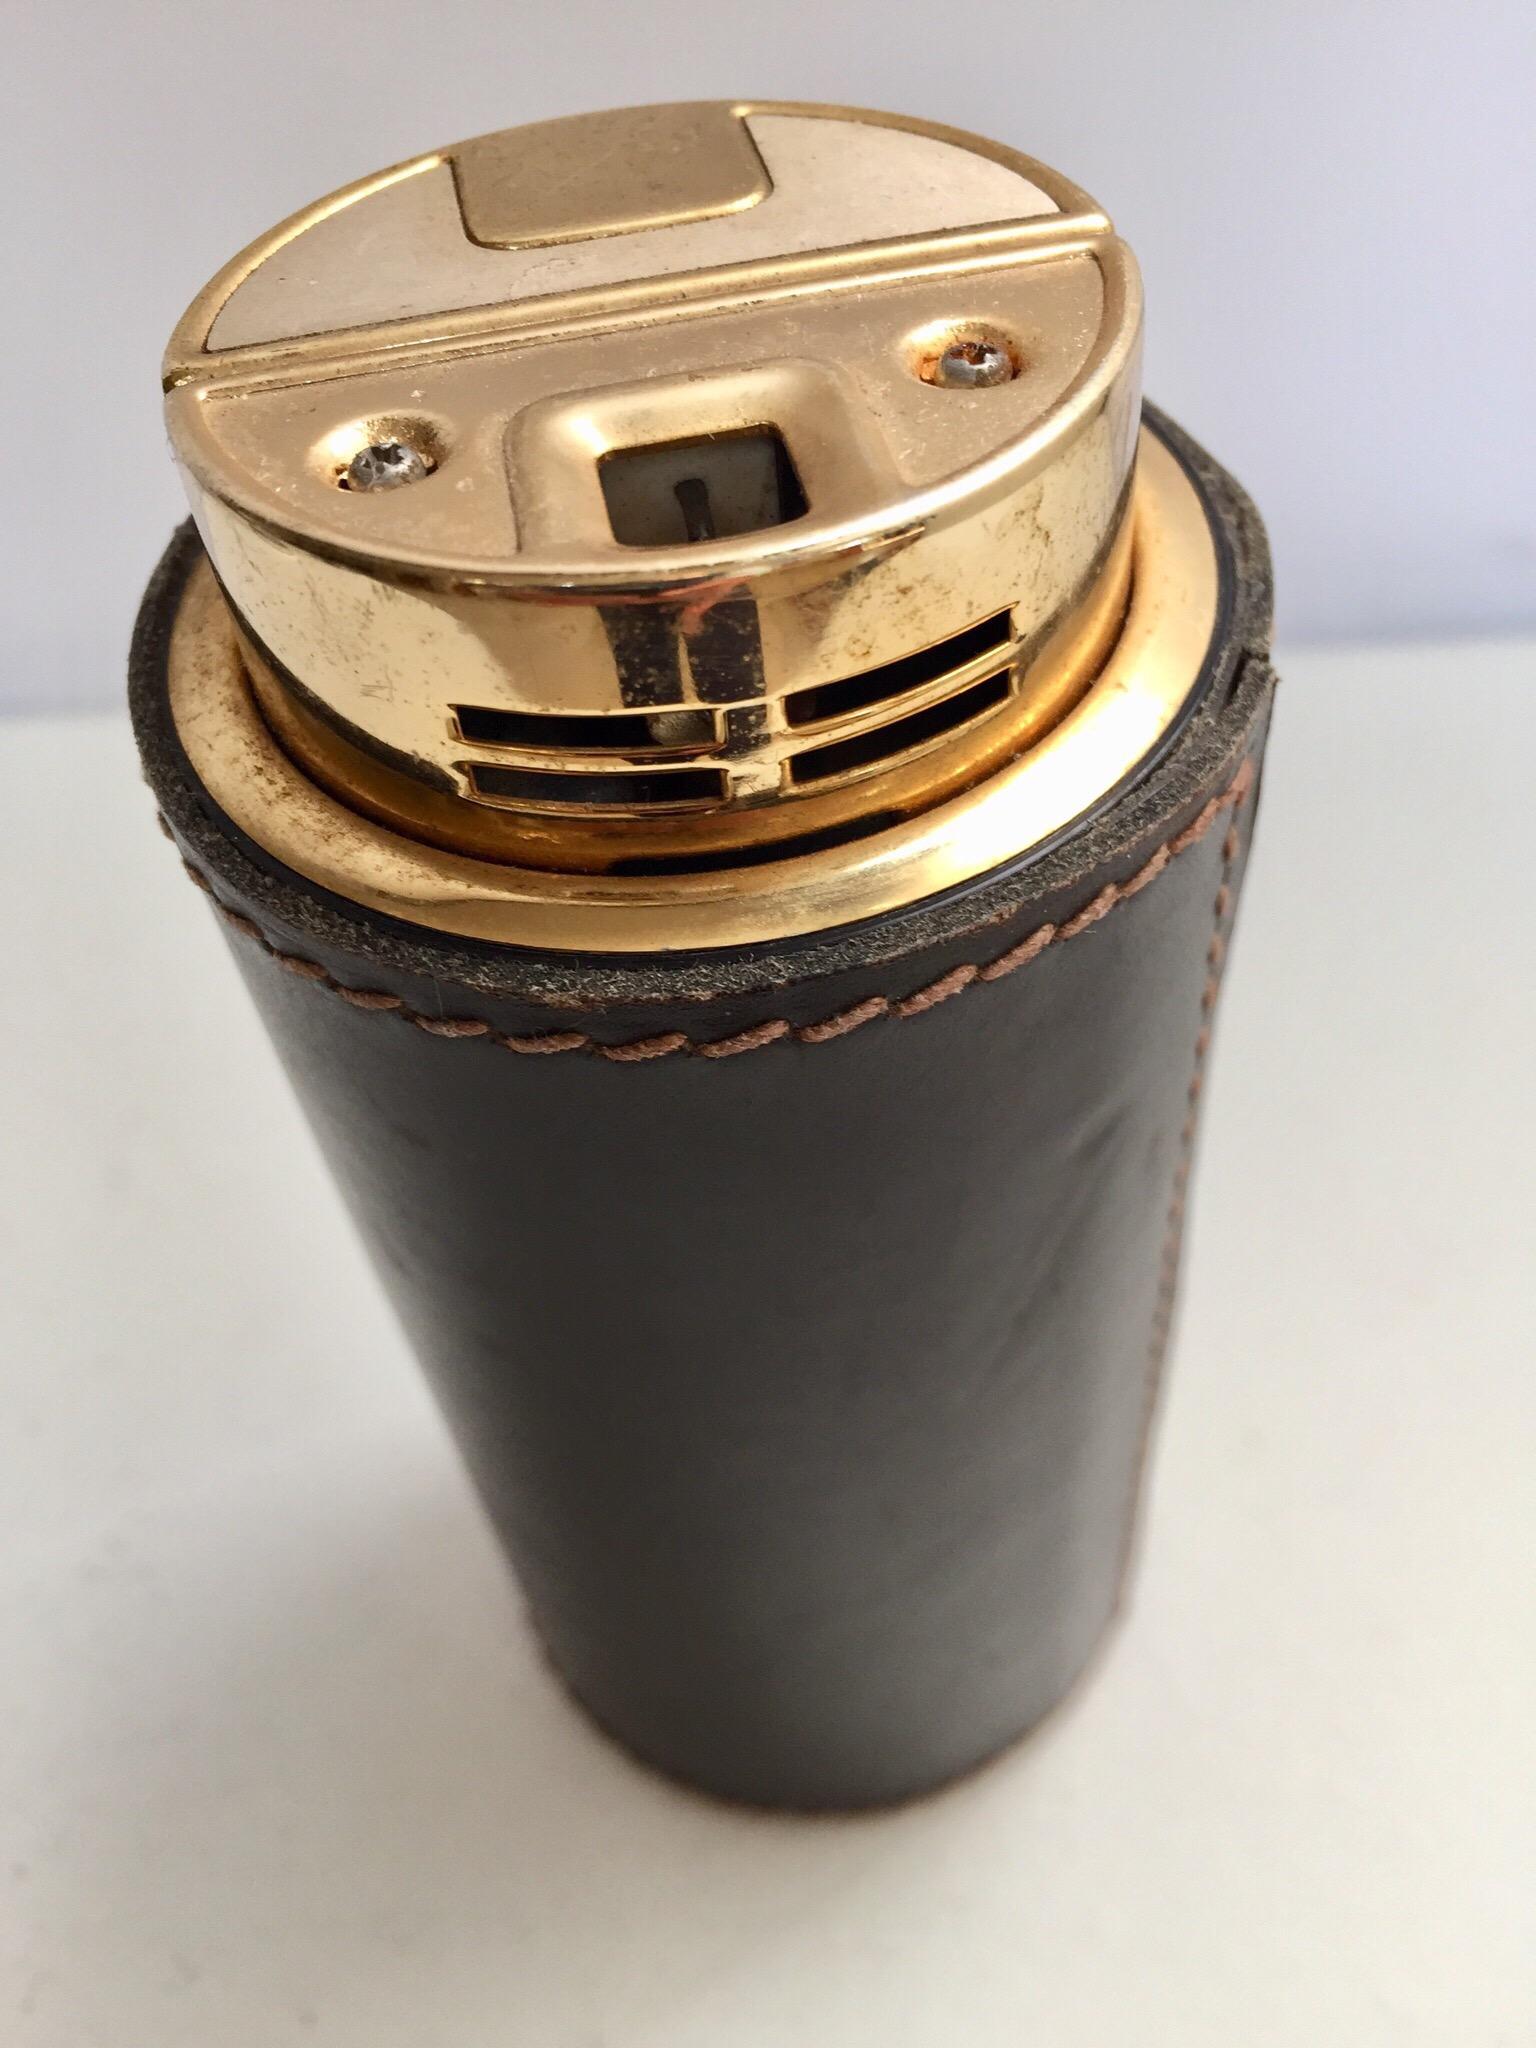 French leather Art Deco table lighter by Delvaux Paris.
Handstitched rich deep brown leather table lighter in brass. 
Handmade in the middle of the 1950s.
Excellent vintage condition. Great decorative brass and leather Art Deco collectible rare